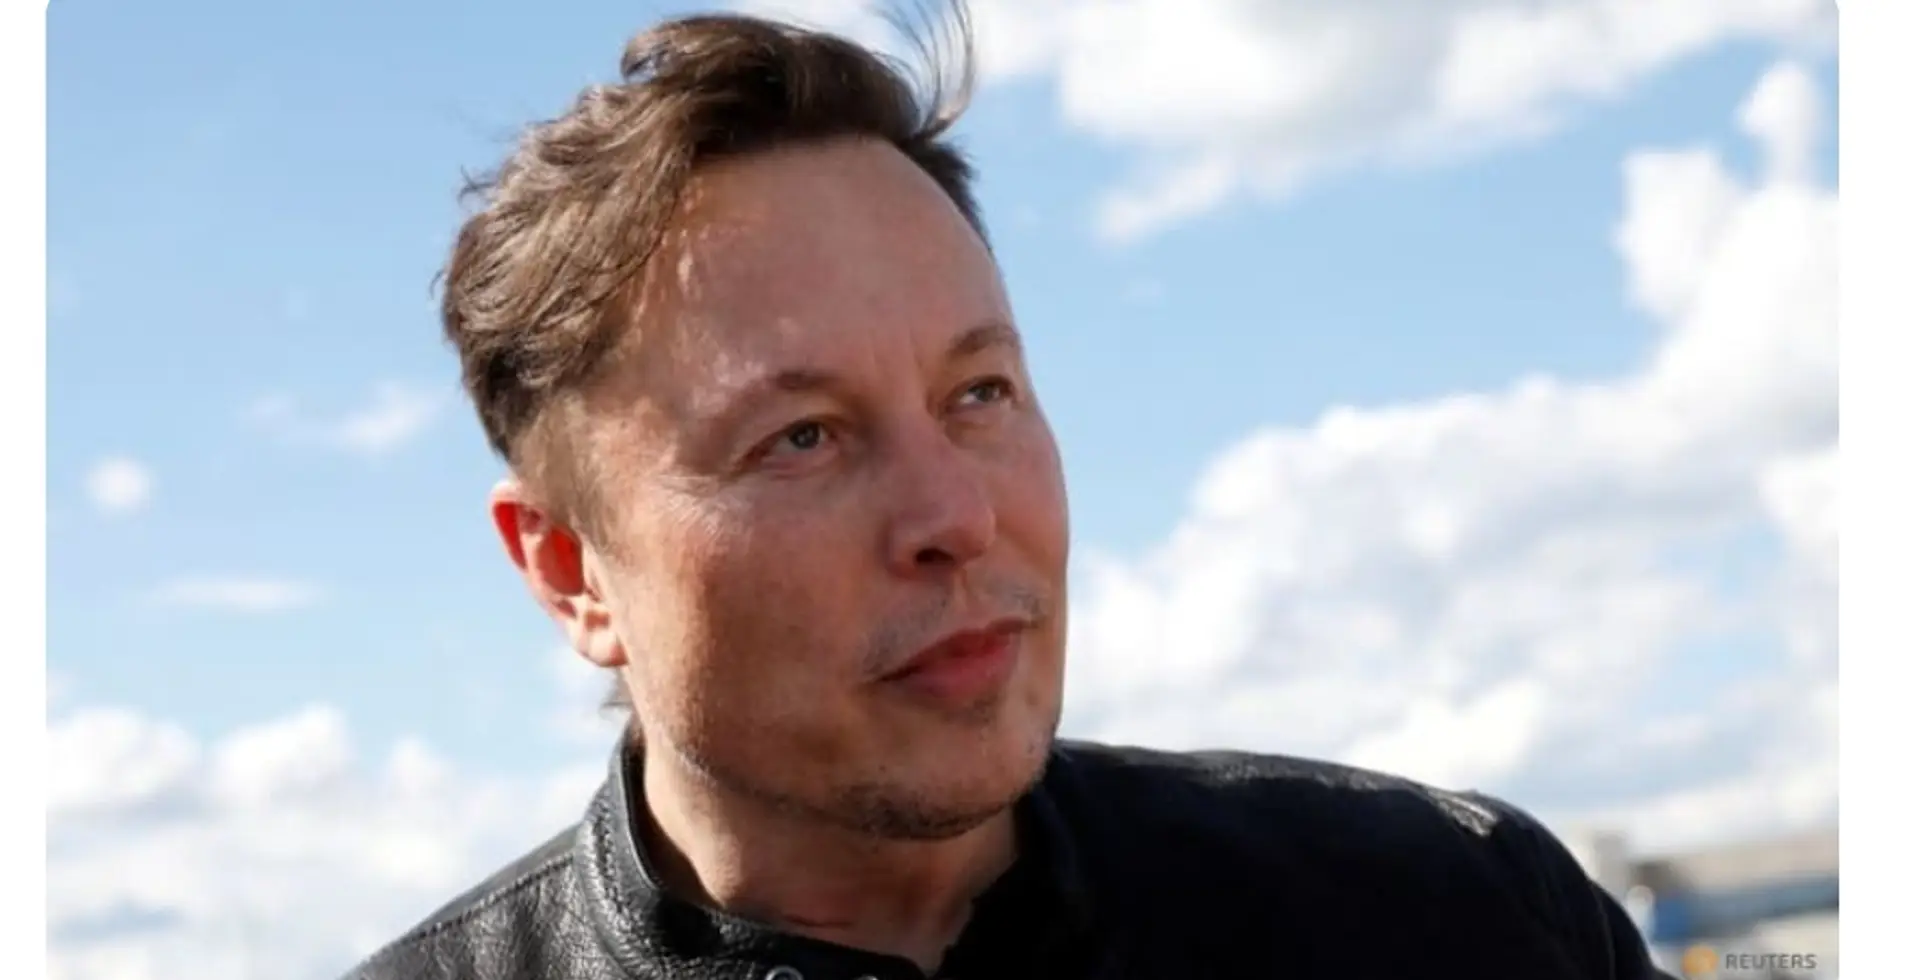 TESLA CEO Elon Musk says he is buying Manchester United